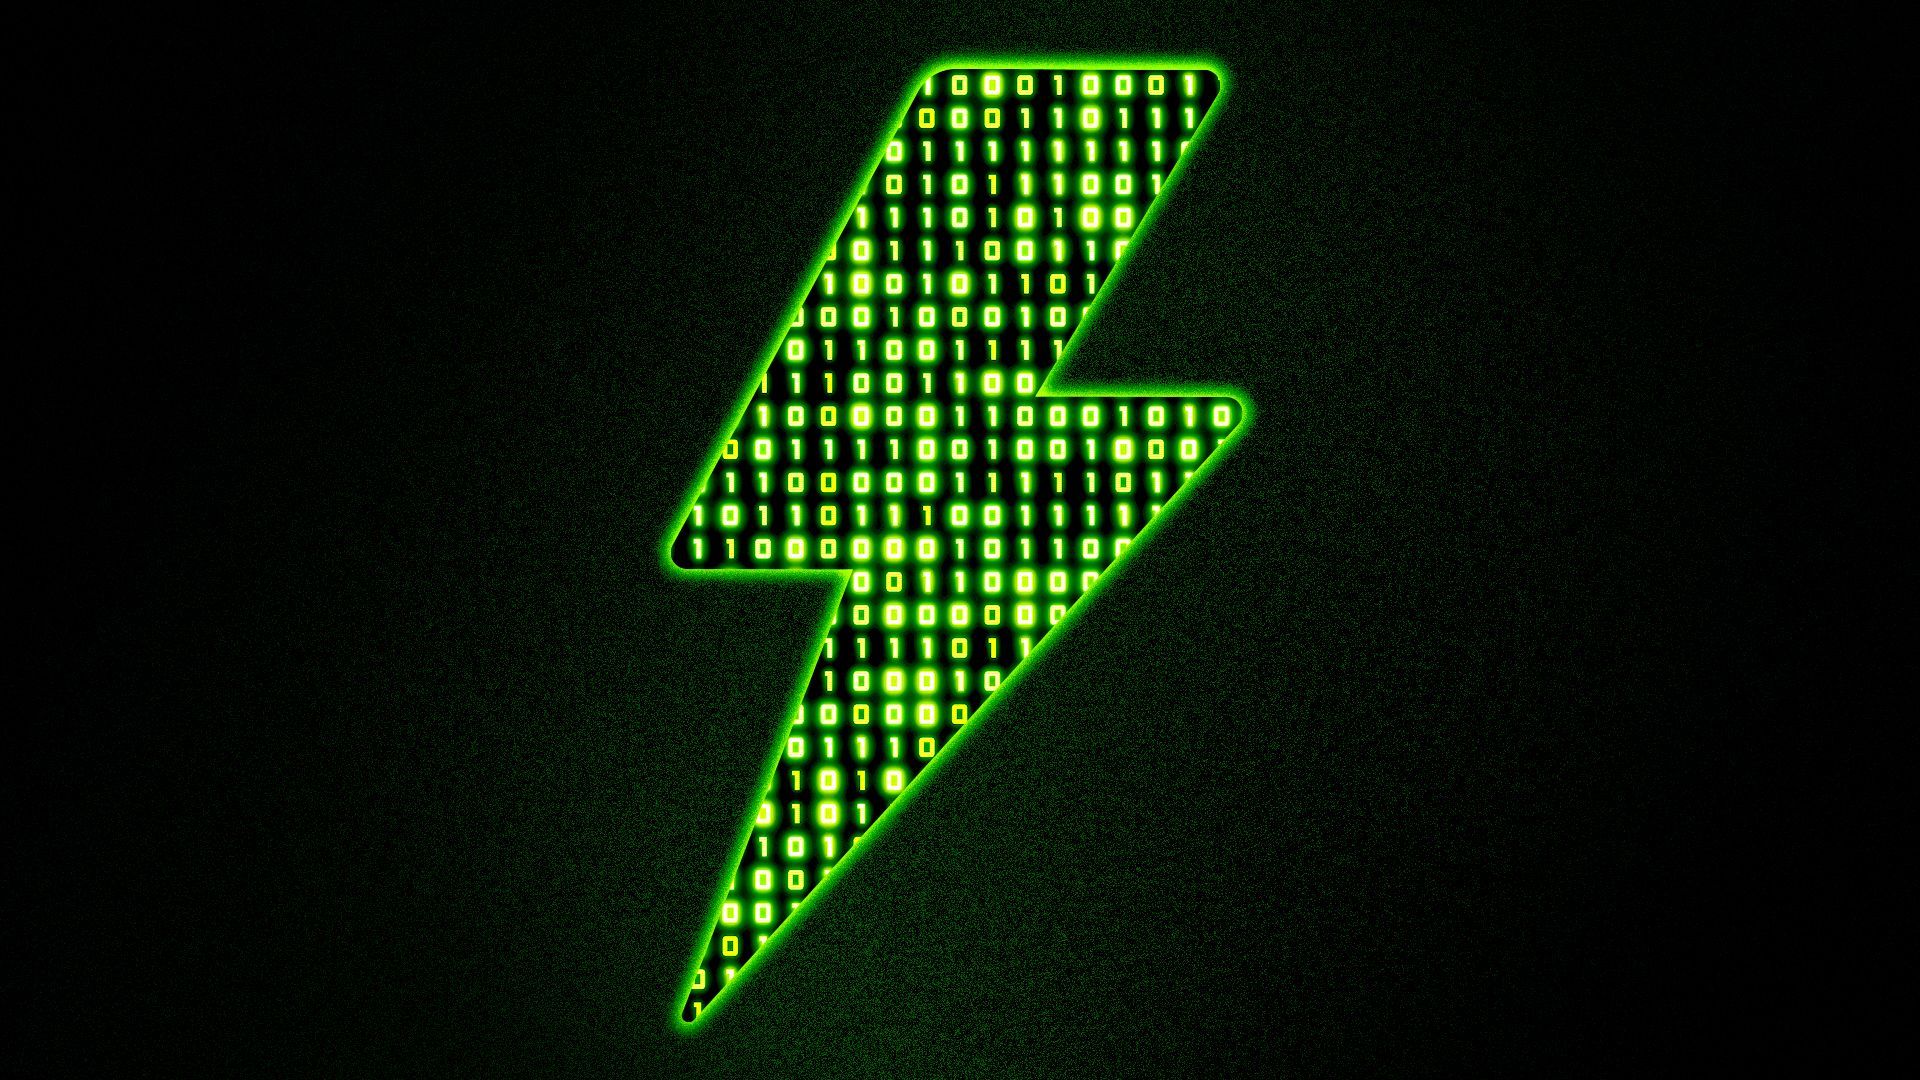 Illustration of a glowing lightning bolt symbol filled with binary code.